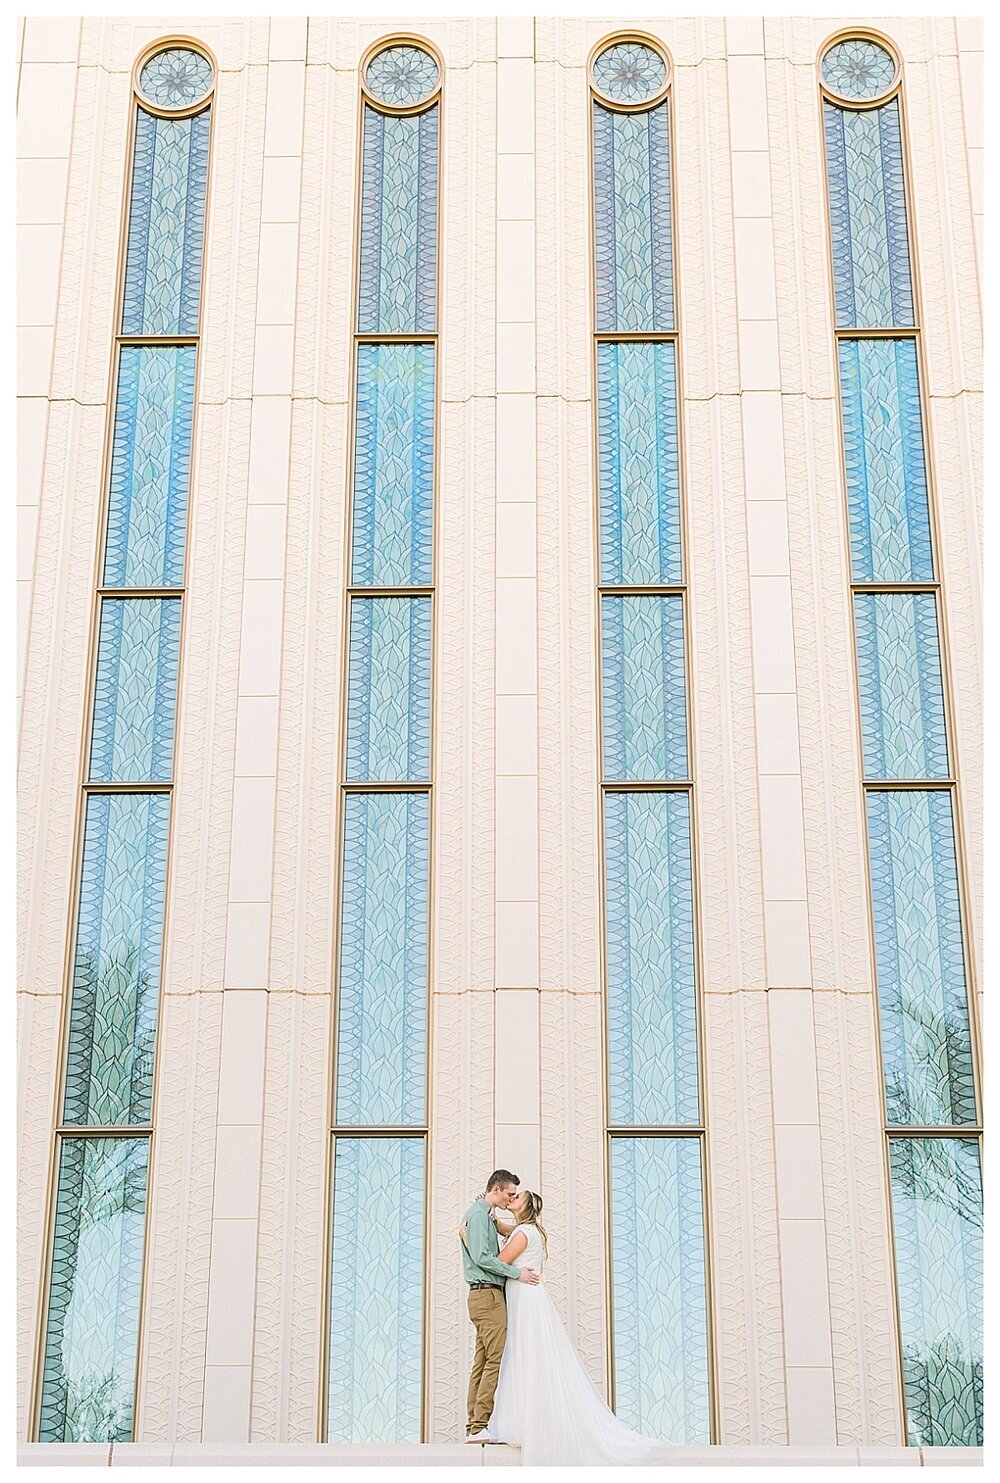 Stretching glass backdrop with couple kissing in front of the Gilber, Arizona Temple. Wedding Photography taken by Melissa Fritzsche Photography.